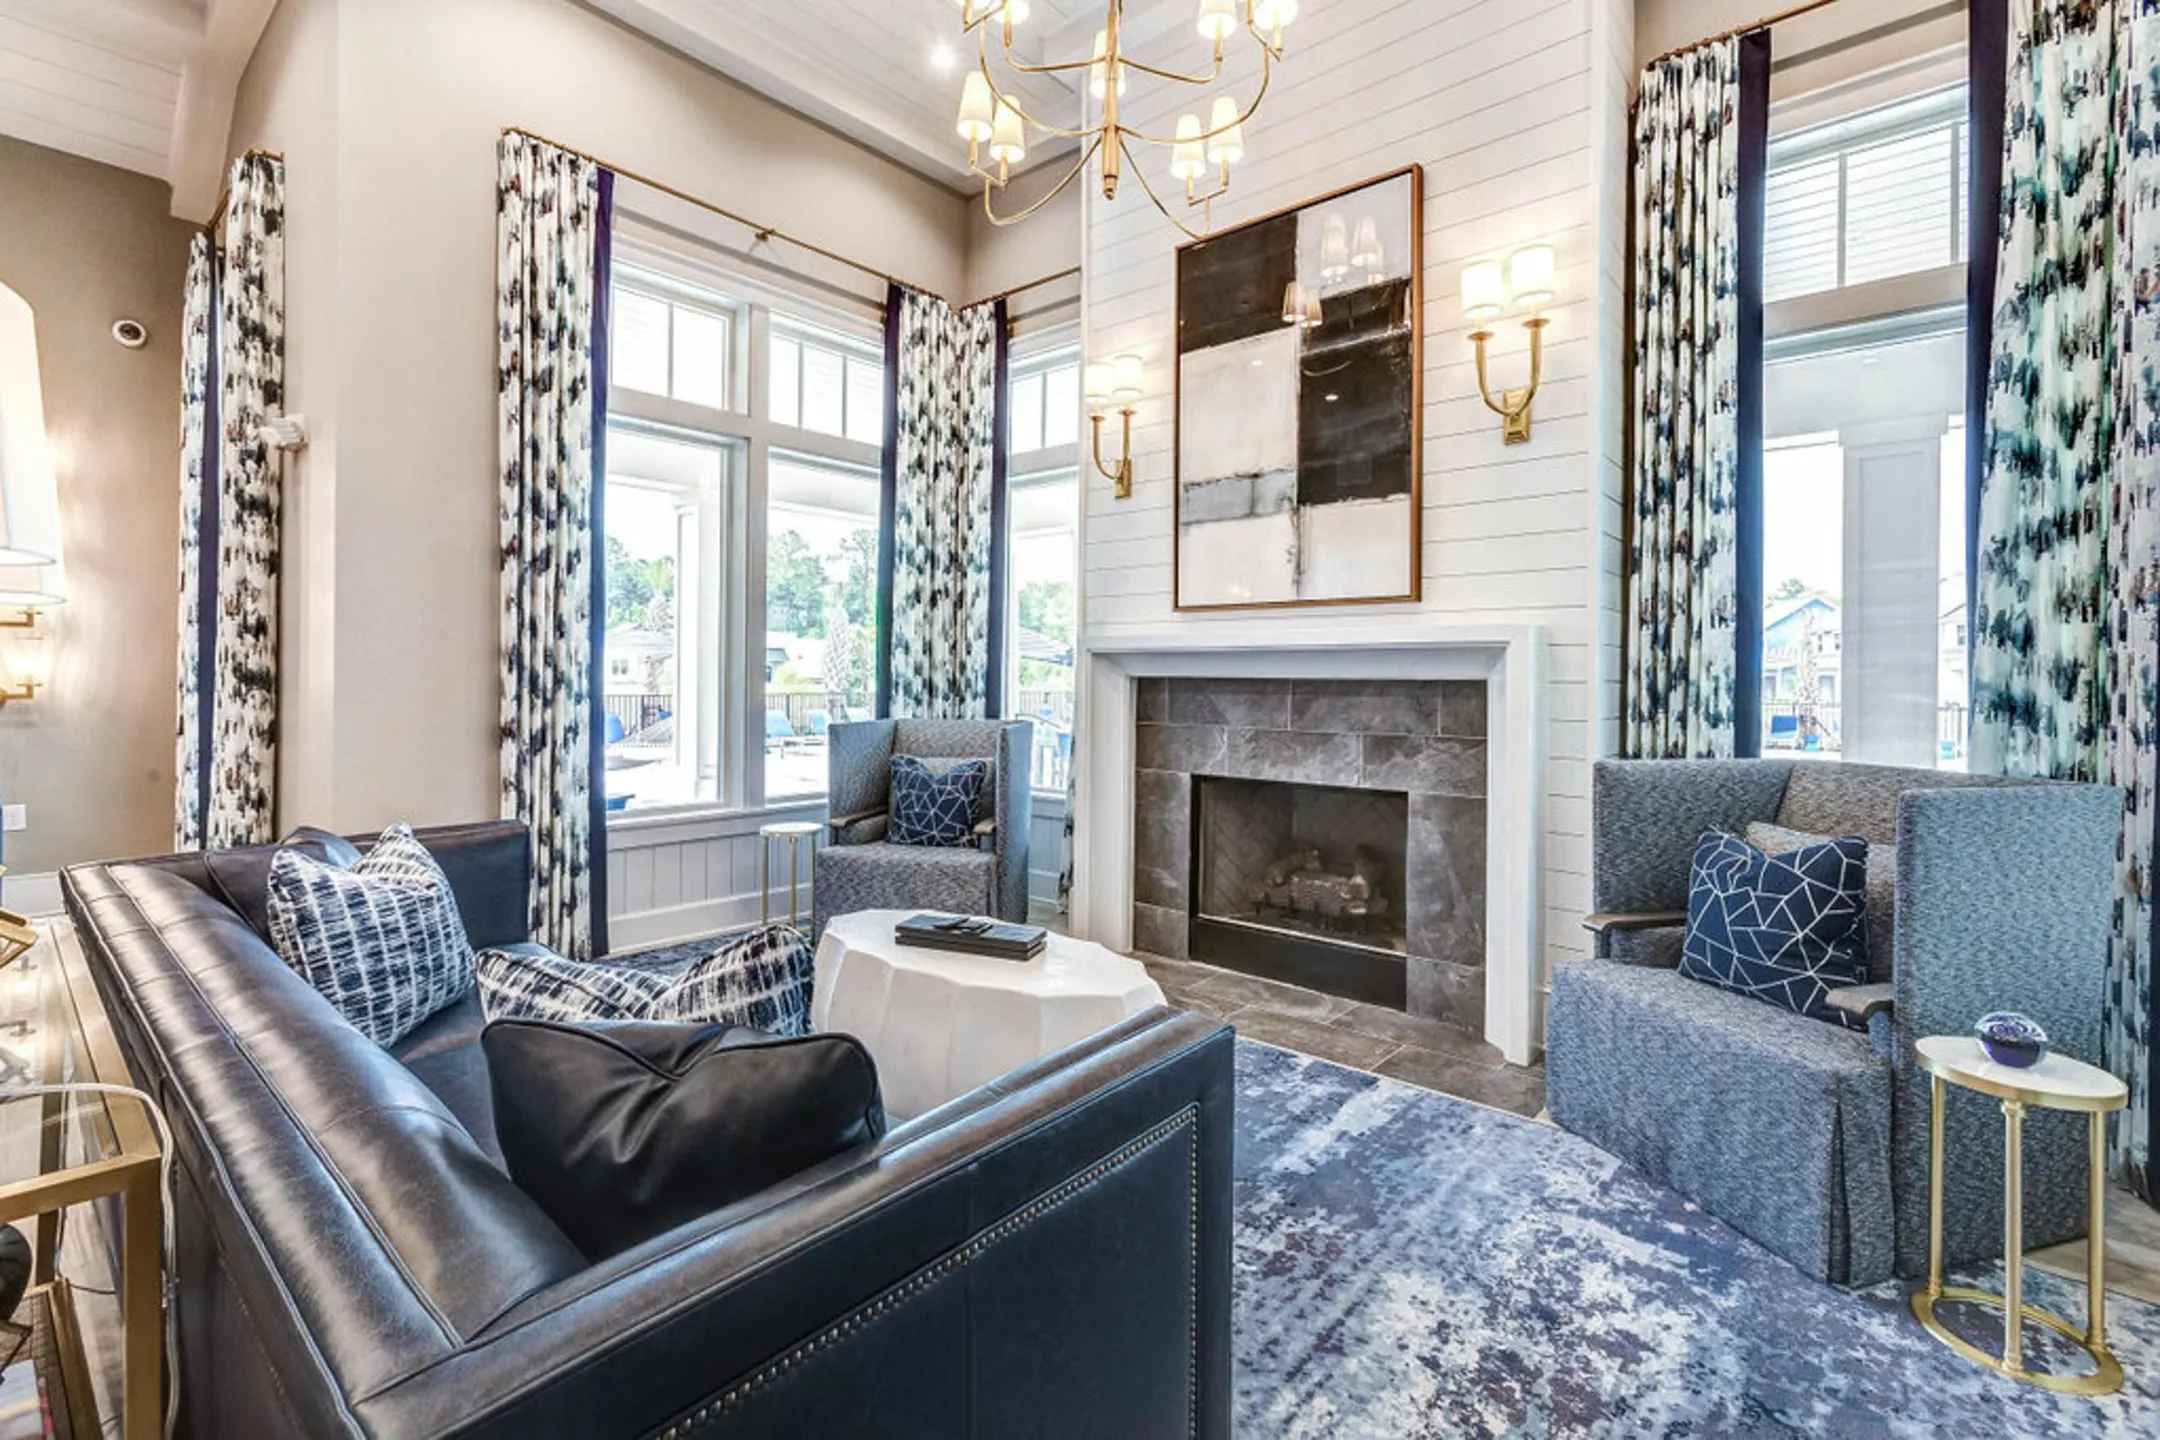 Living Room - Crowne at One Seventy - Bluffton, SC